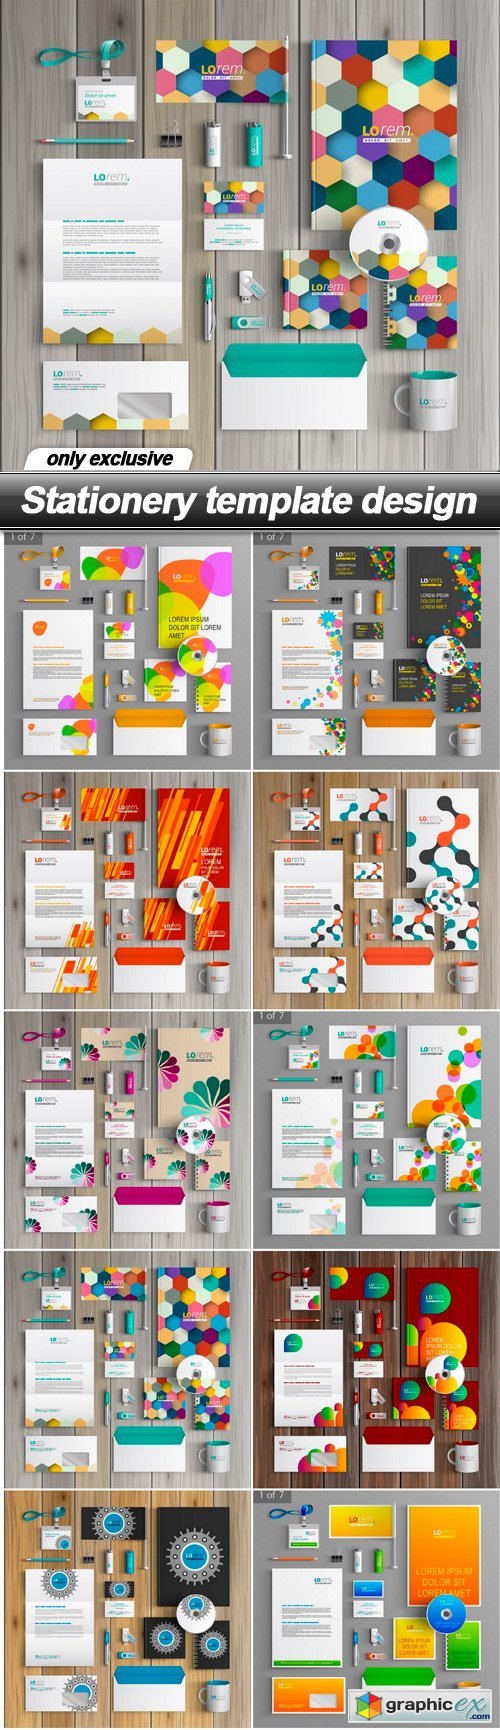 Stationery template design - 10 EPS